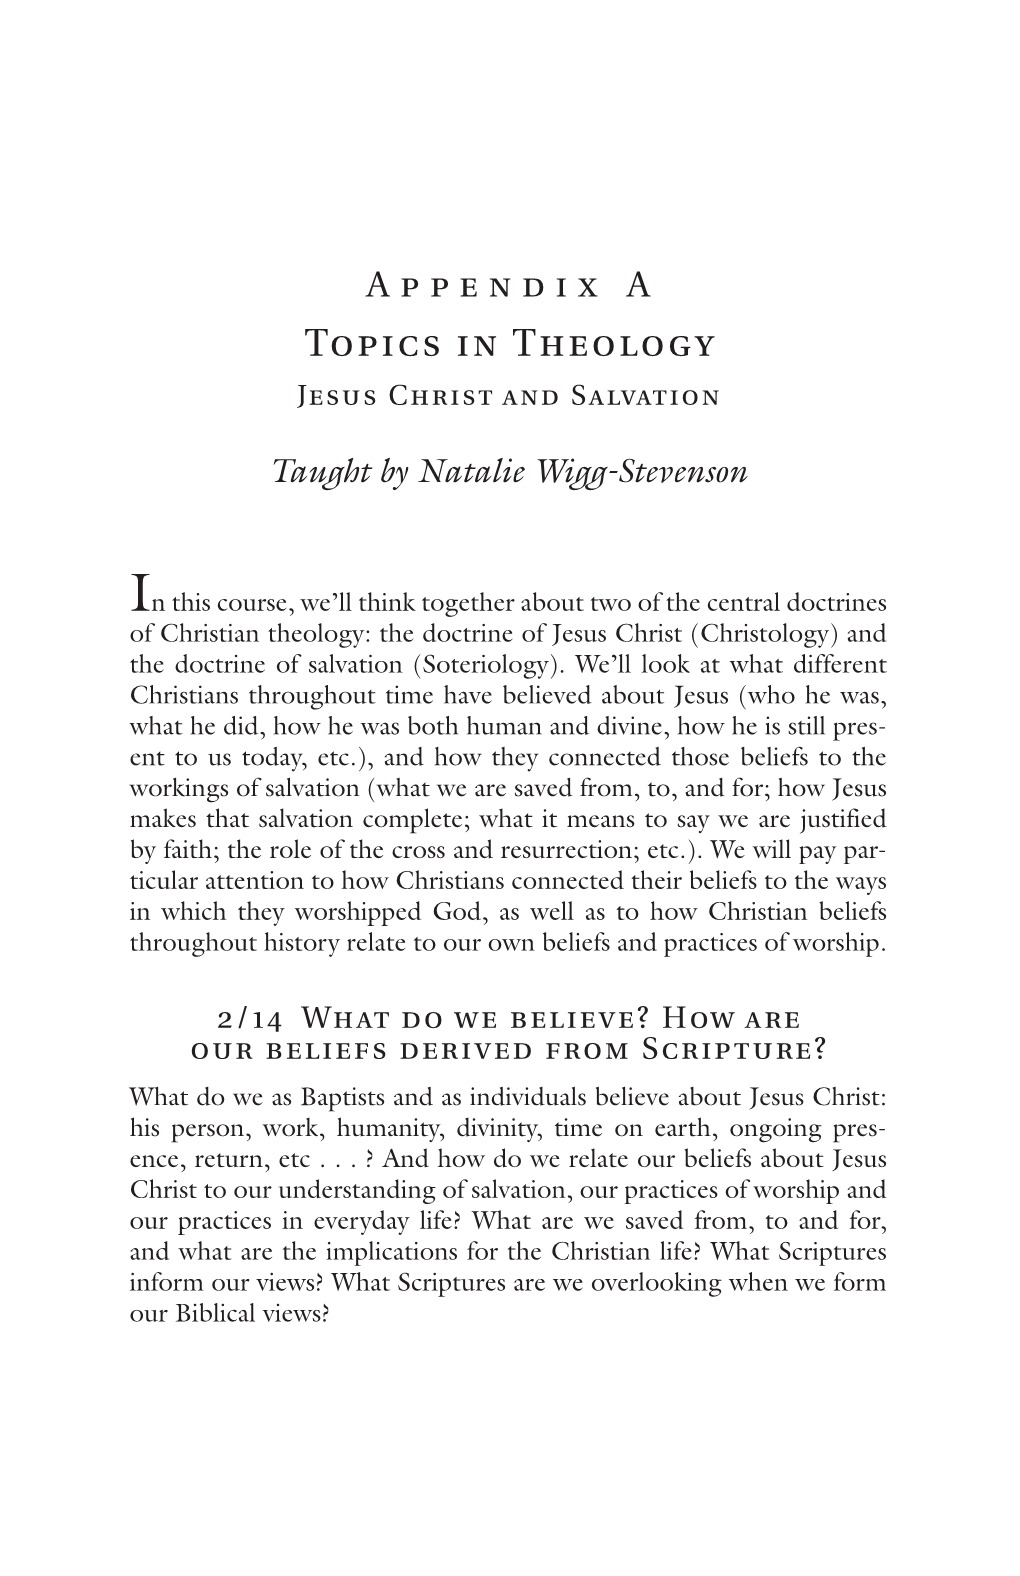 Topics in Theology Jesus Christ and Salvation